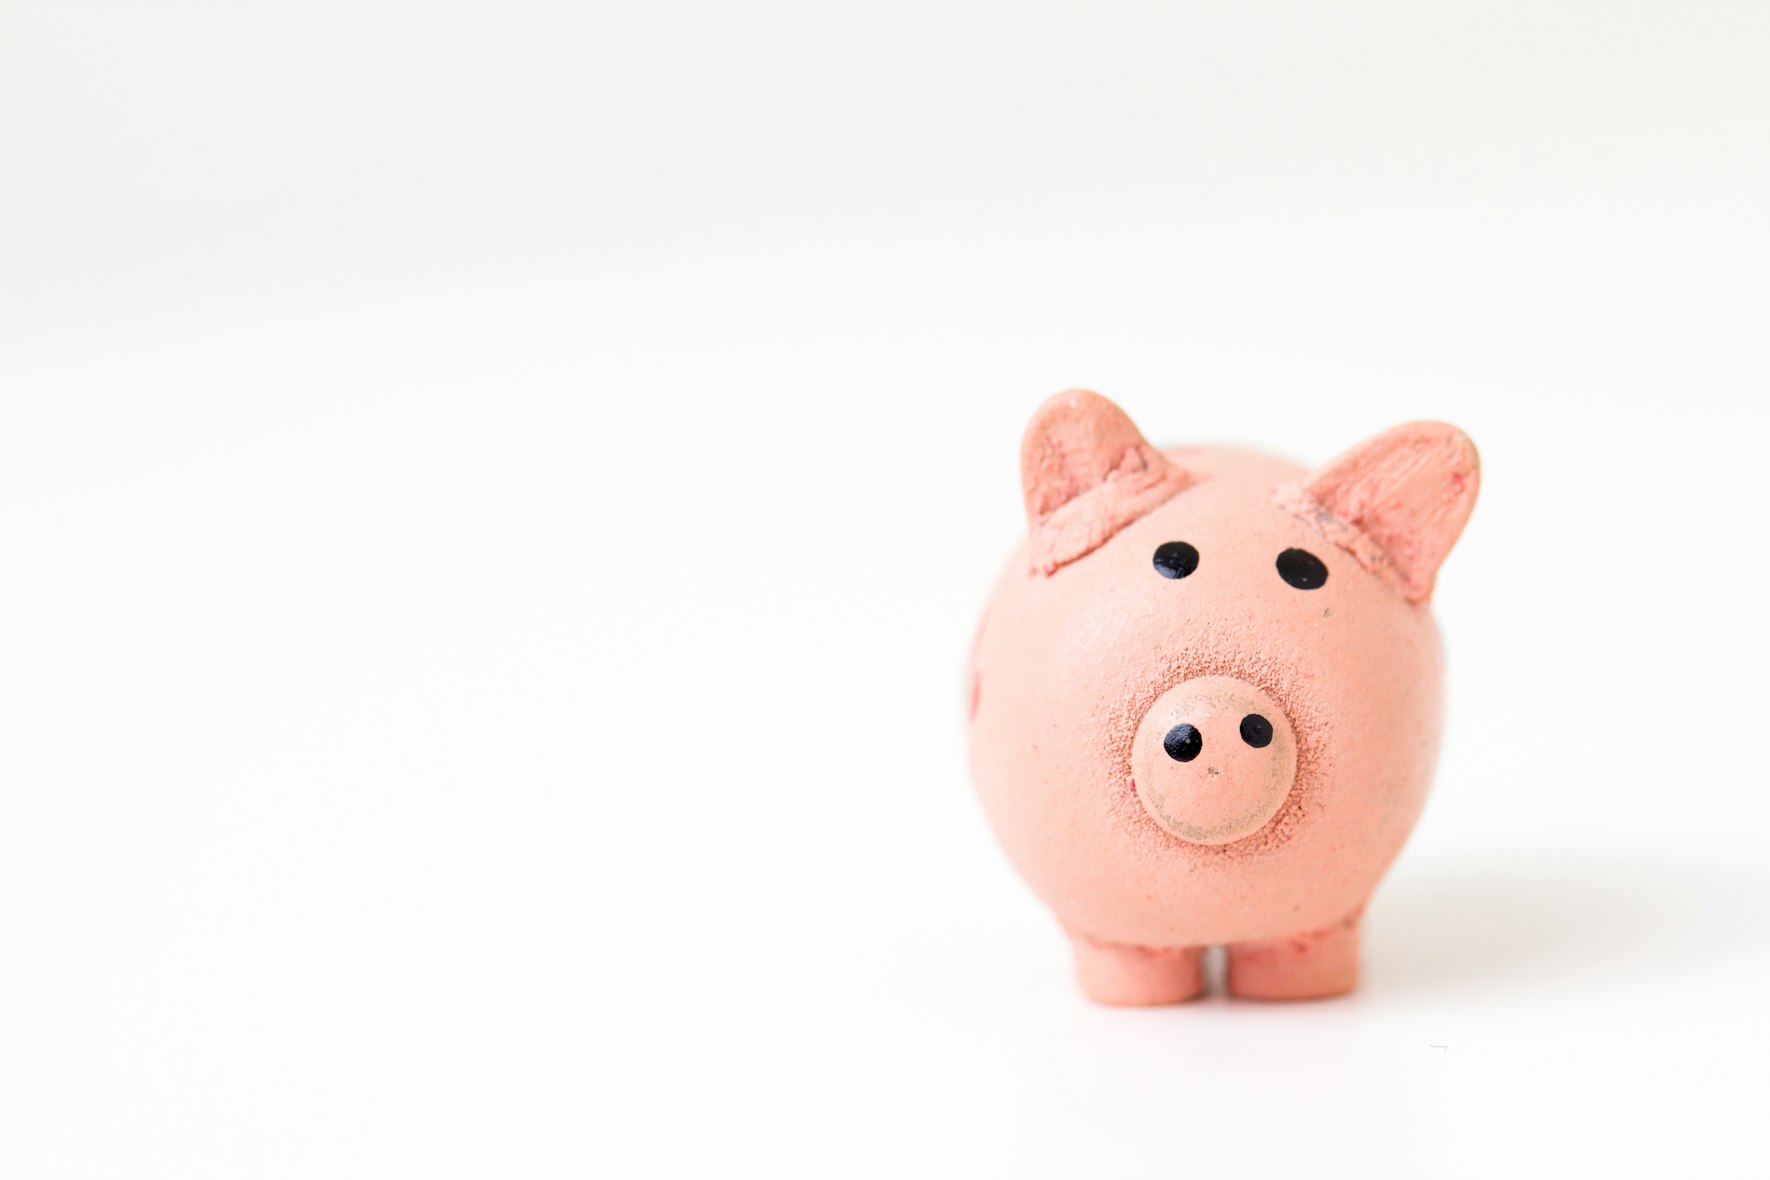 Image is of a pink piggy bank off to the side on a white background